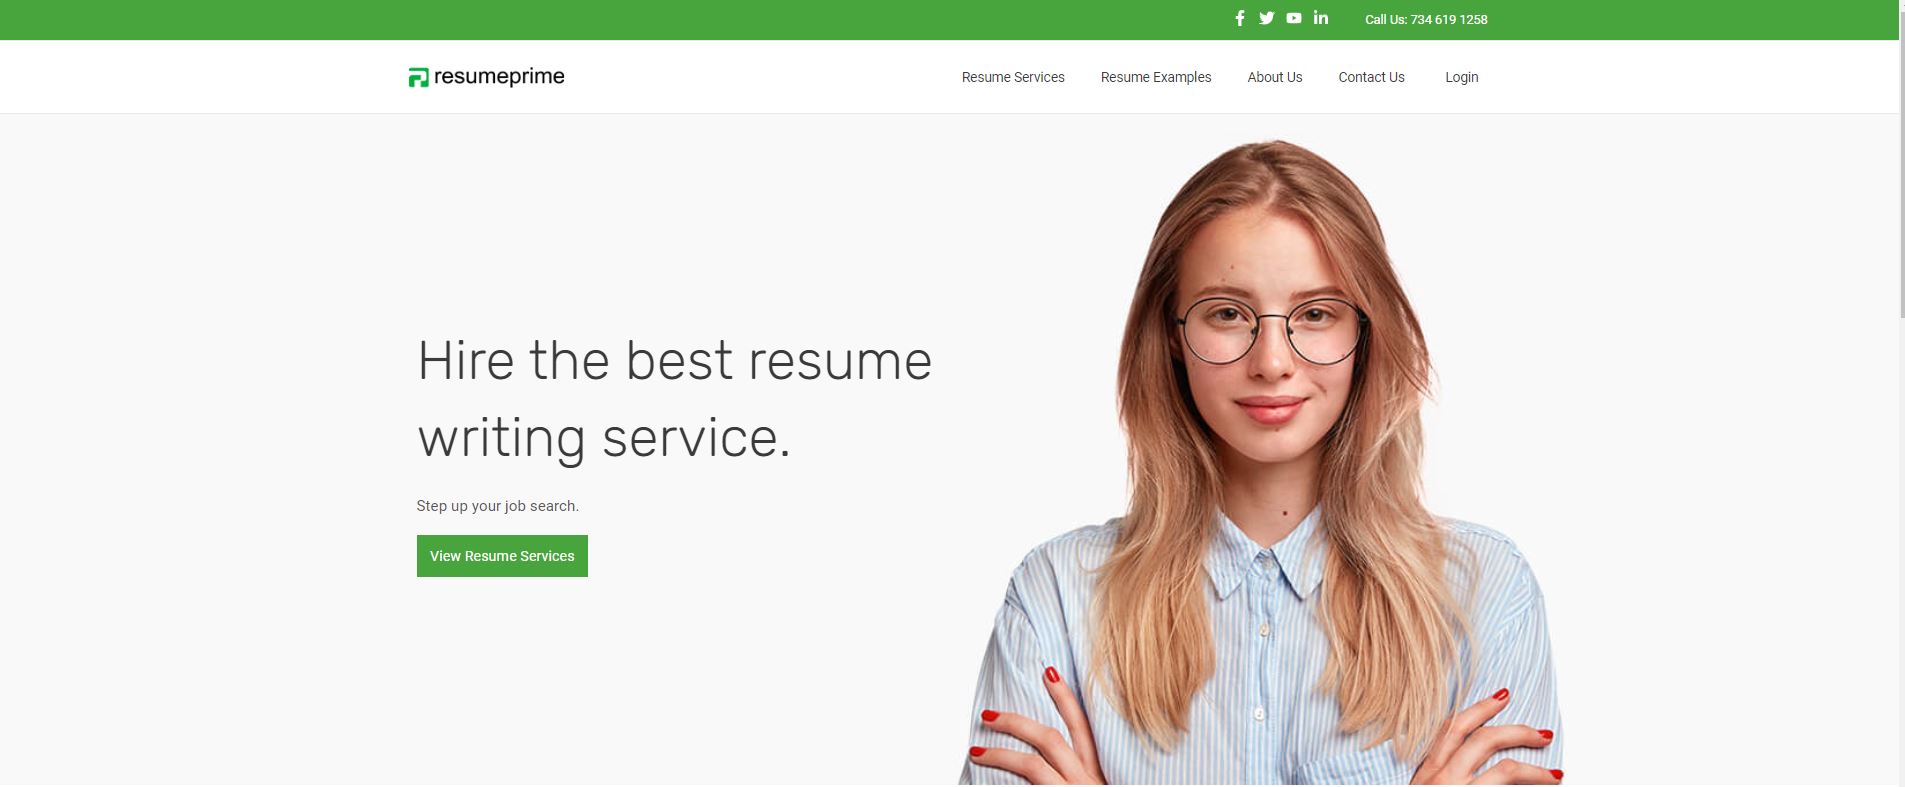 Best Actor Resume Writing Services Review Resume Prime